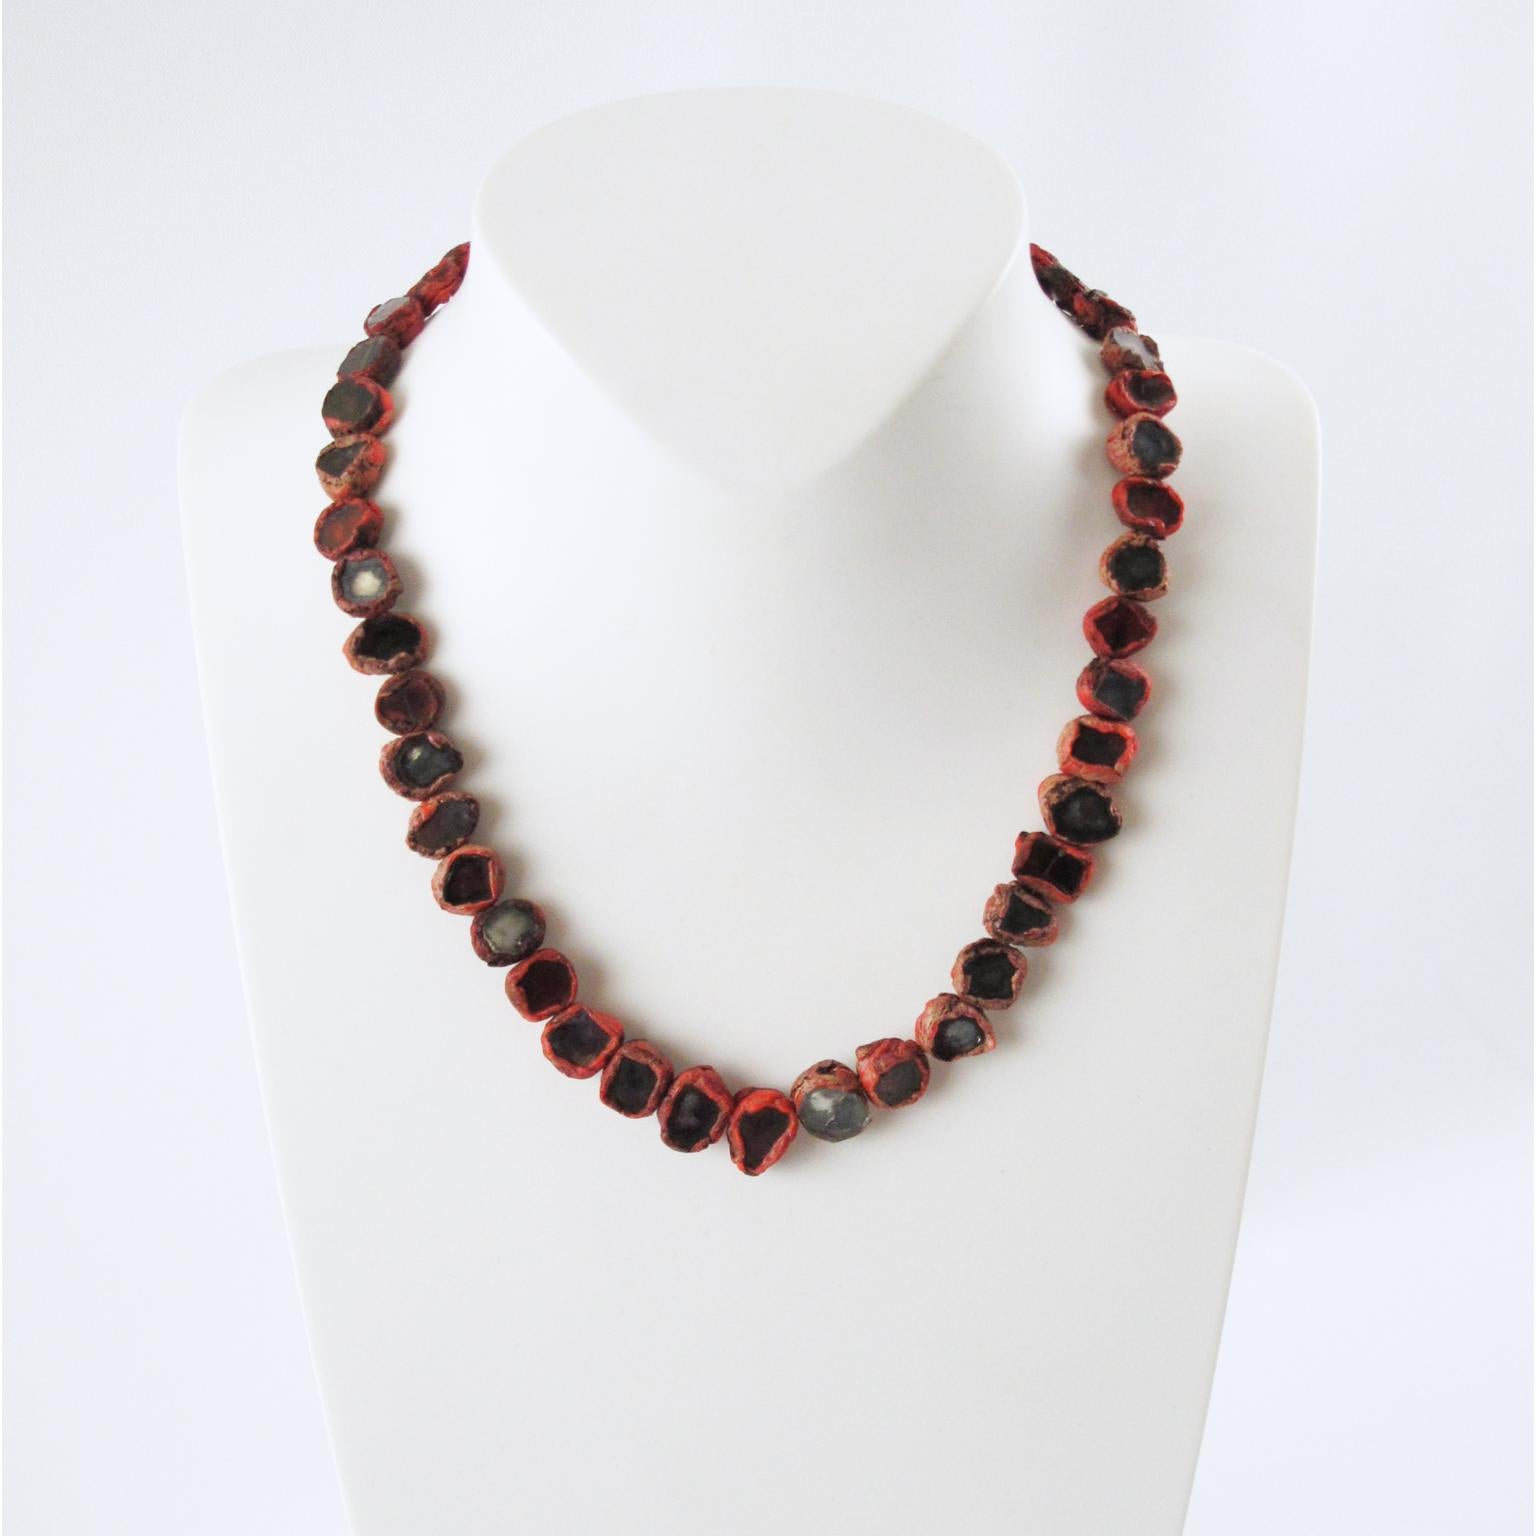 Elegant 1960s Talosel Resin necklace by Line Vautrin, Paris. Red-colored resin or Talosel necklace with encrusted tinted mirrors.
Glass and Talosel, a technique created by Line Vautrin, in which she used cellulose acetate that was fractured into